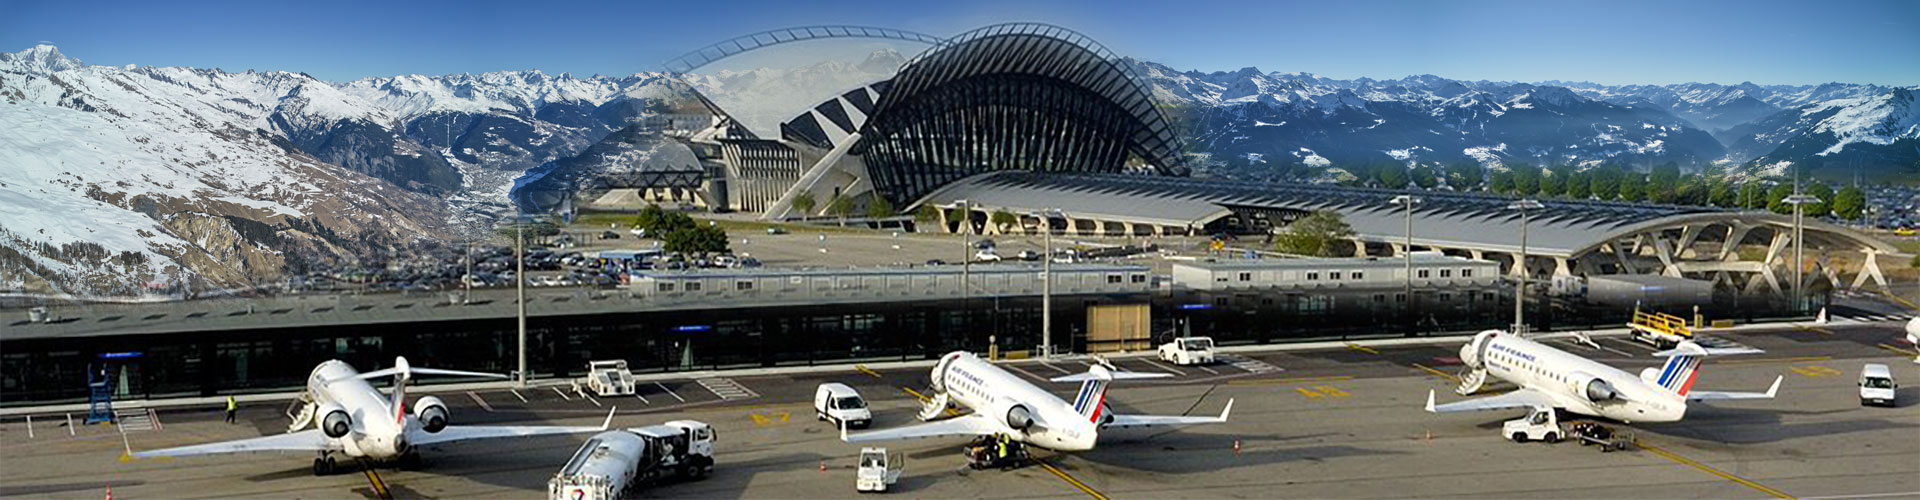 Taxi Lyon airport transfers to ski resorts Les Arcs in France